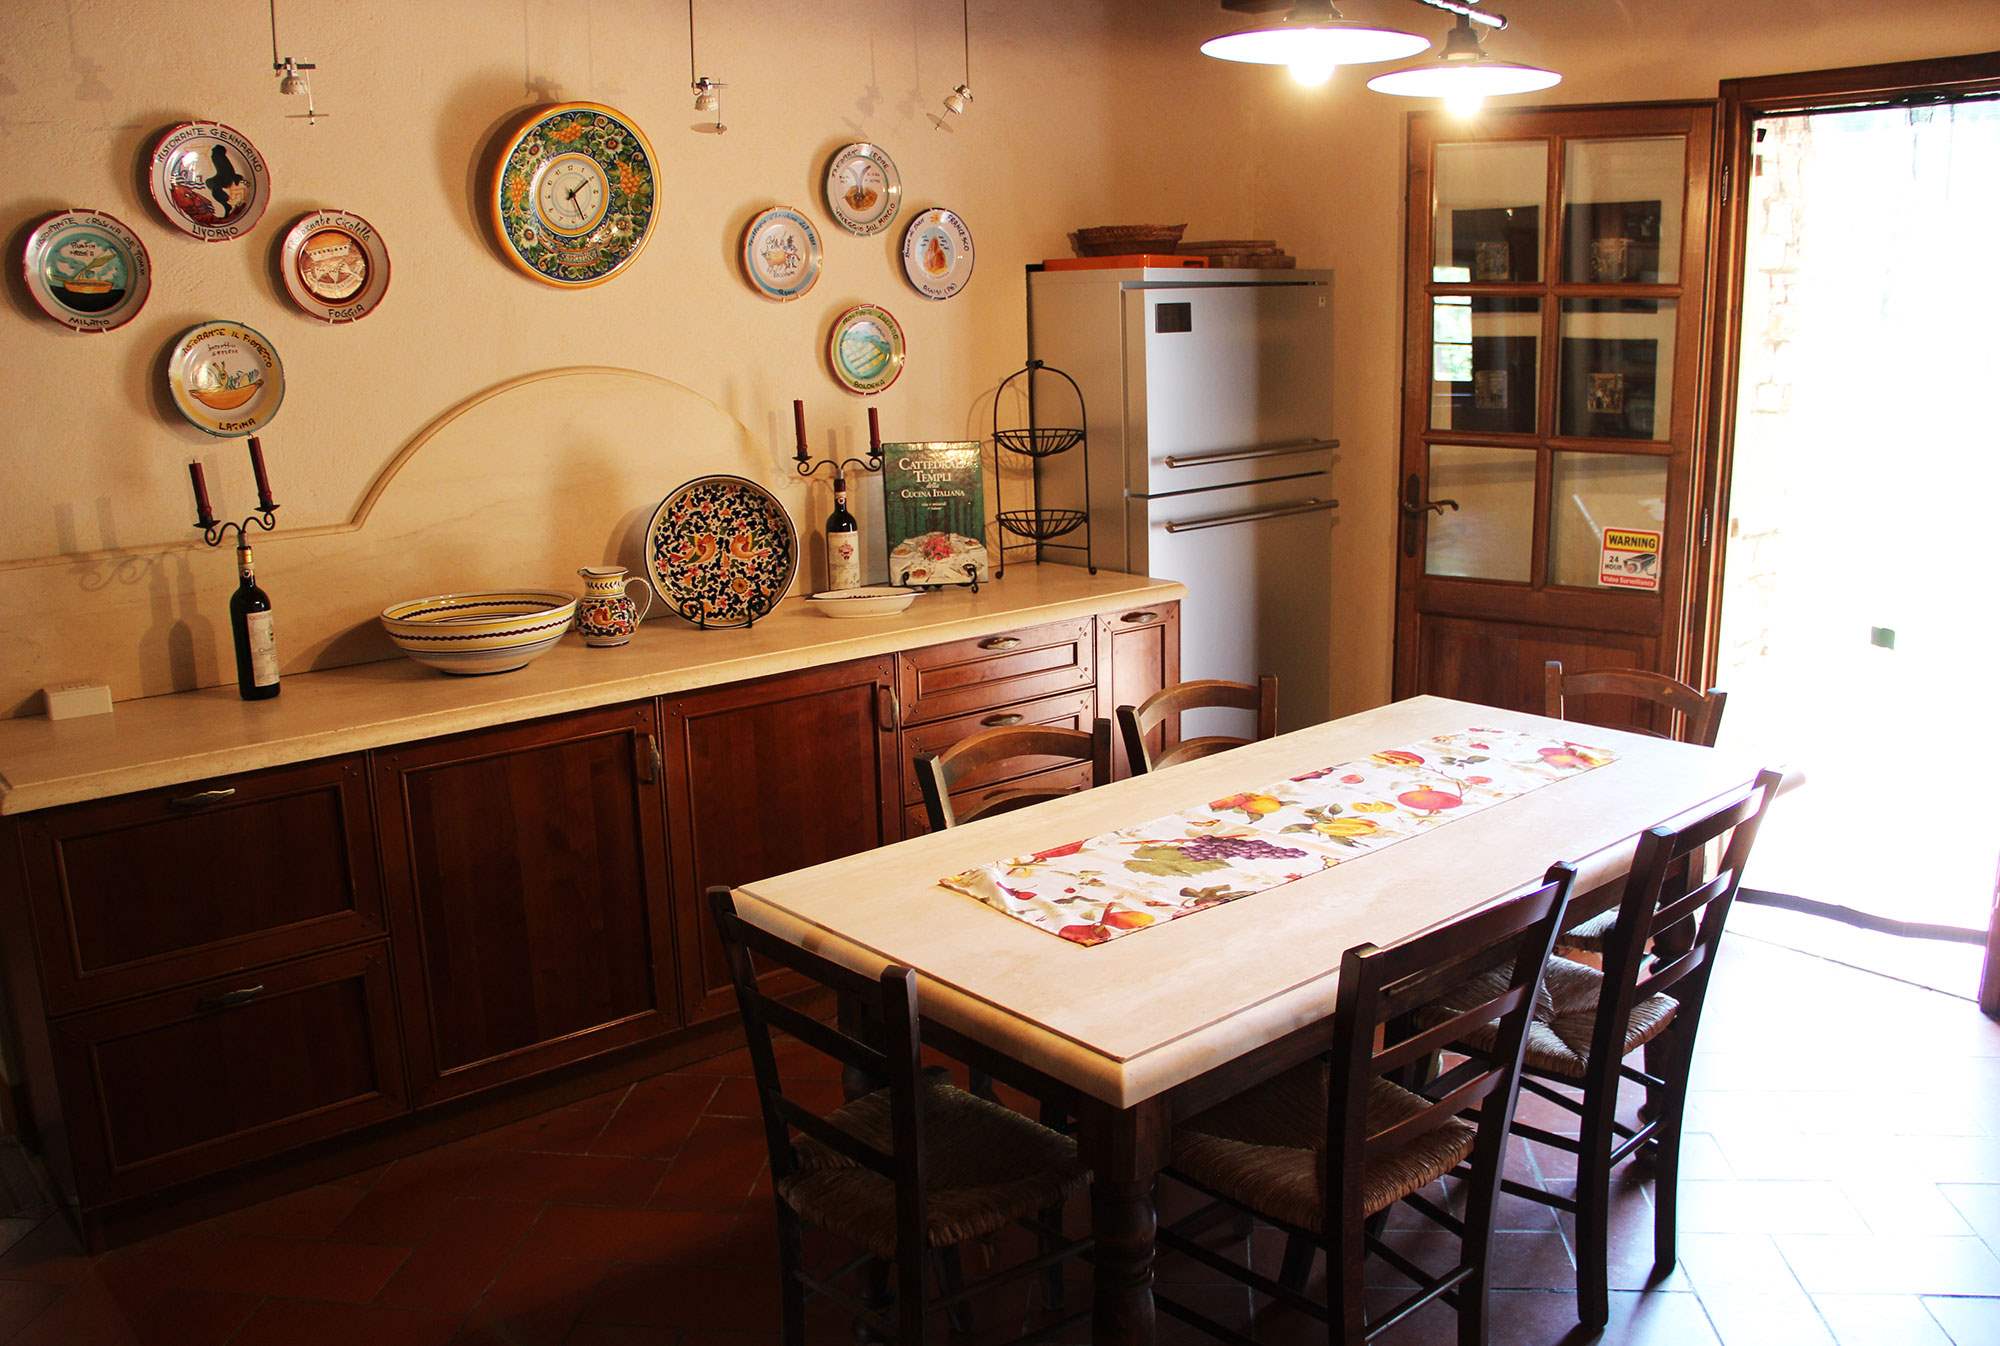 Villa Felicita, Main house and apartment, 10 persons rate, 5 bedroom villa in Chianti & Countryside, Tuscany Photo #10